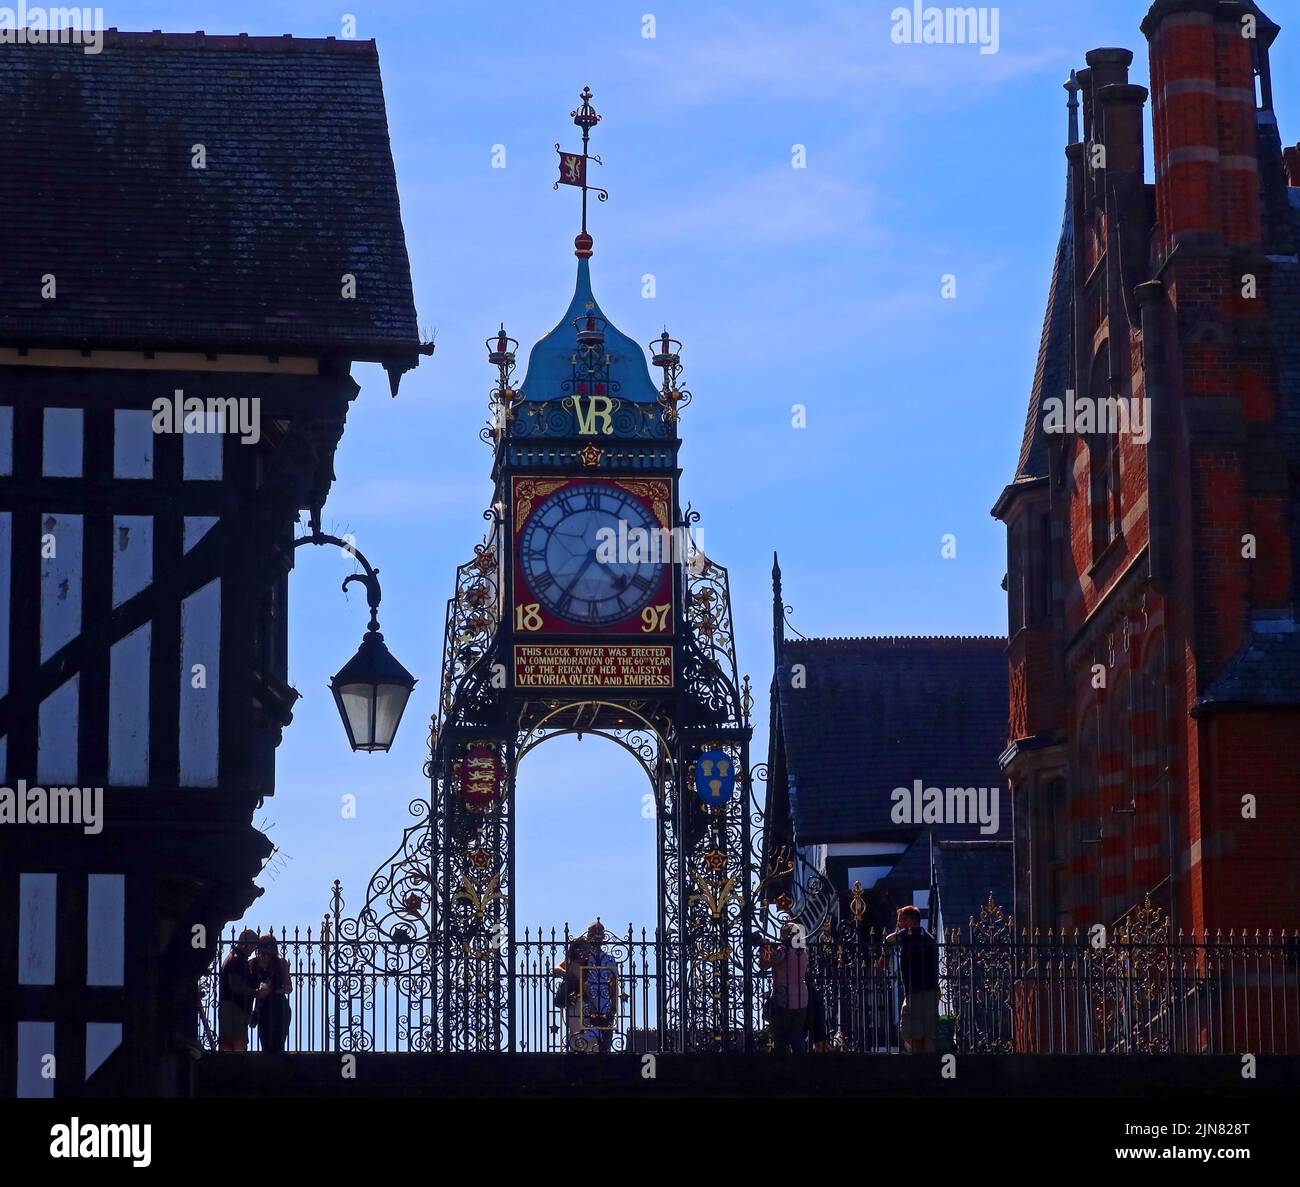 Romantic Eastgate, with the famous Eastgate turret Clock,above the Eastgate of the ancient walls of Chester, Cheshire, England, UK, CH1 1LE Stock Photo